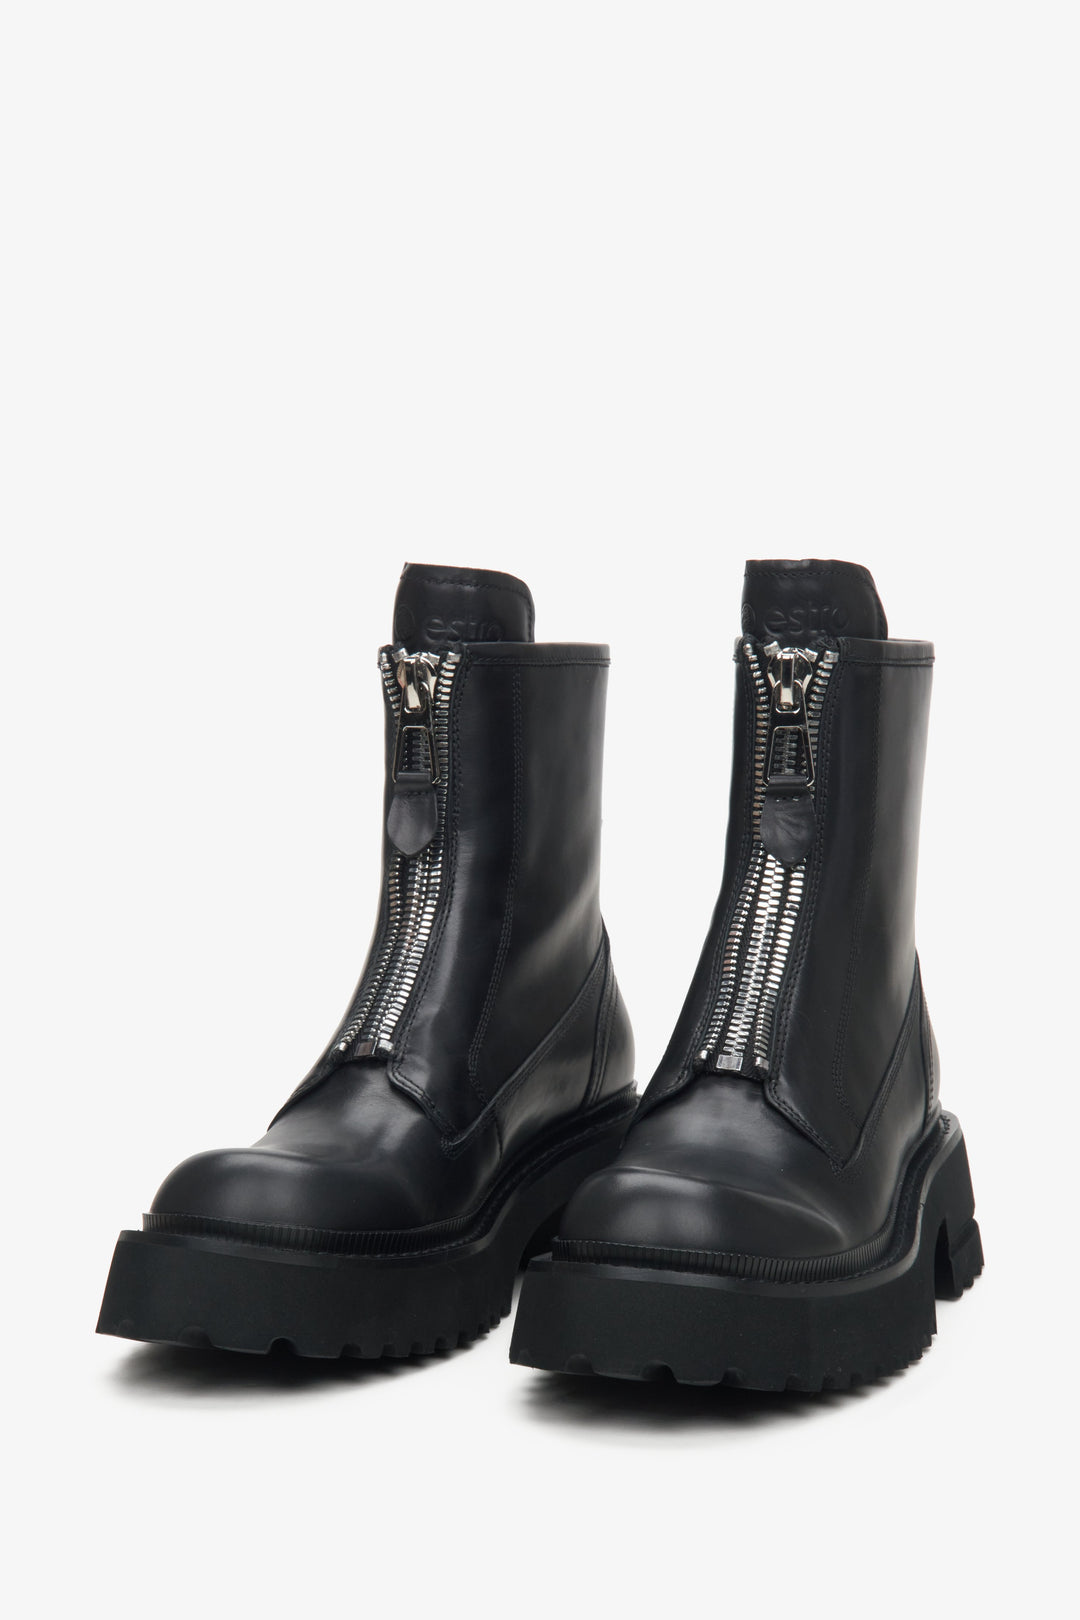 Women's black leather boots with a decorative zipper by Estro - presentation of the toe.